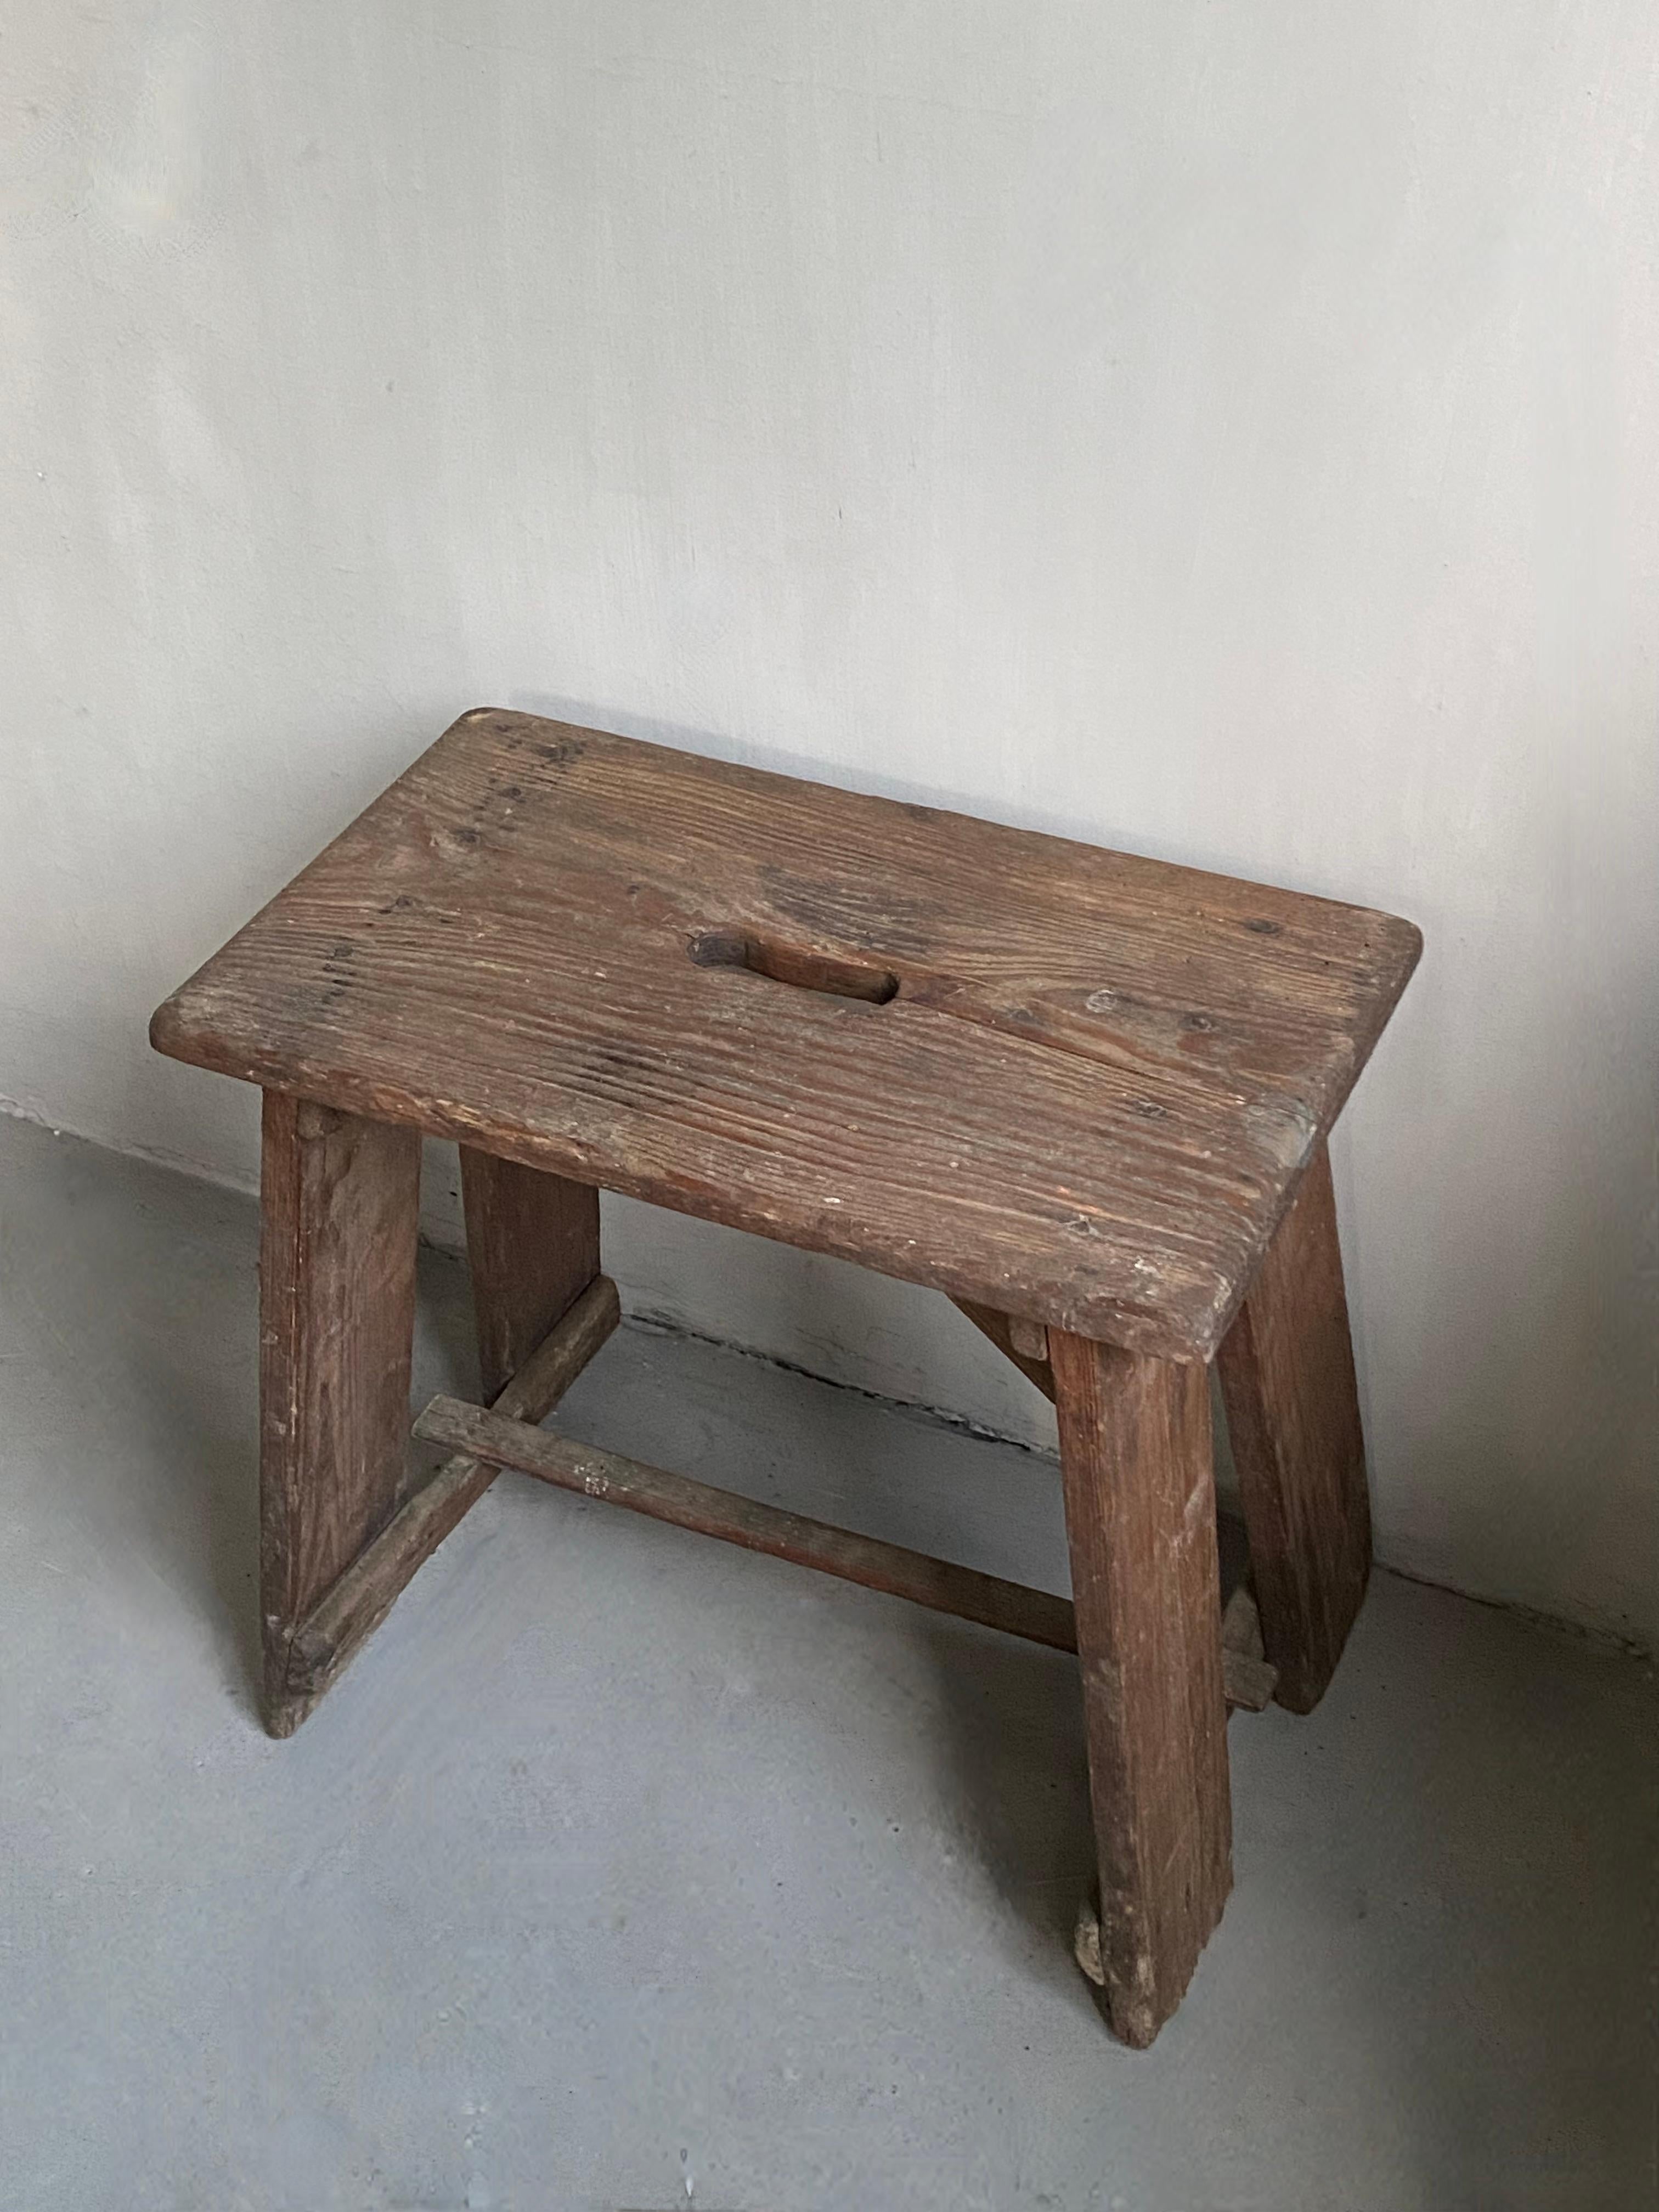 Simplistic small side table from Austria.
Completely original. Beautiful patina.
Can of course also be used as a sitting stool.

We ship worldwide securely